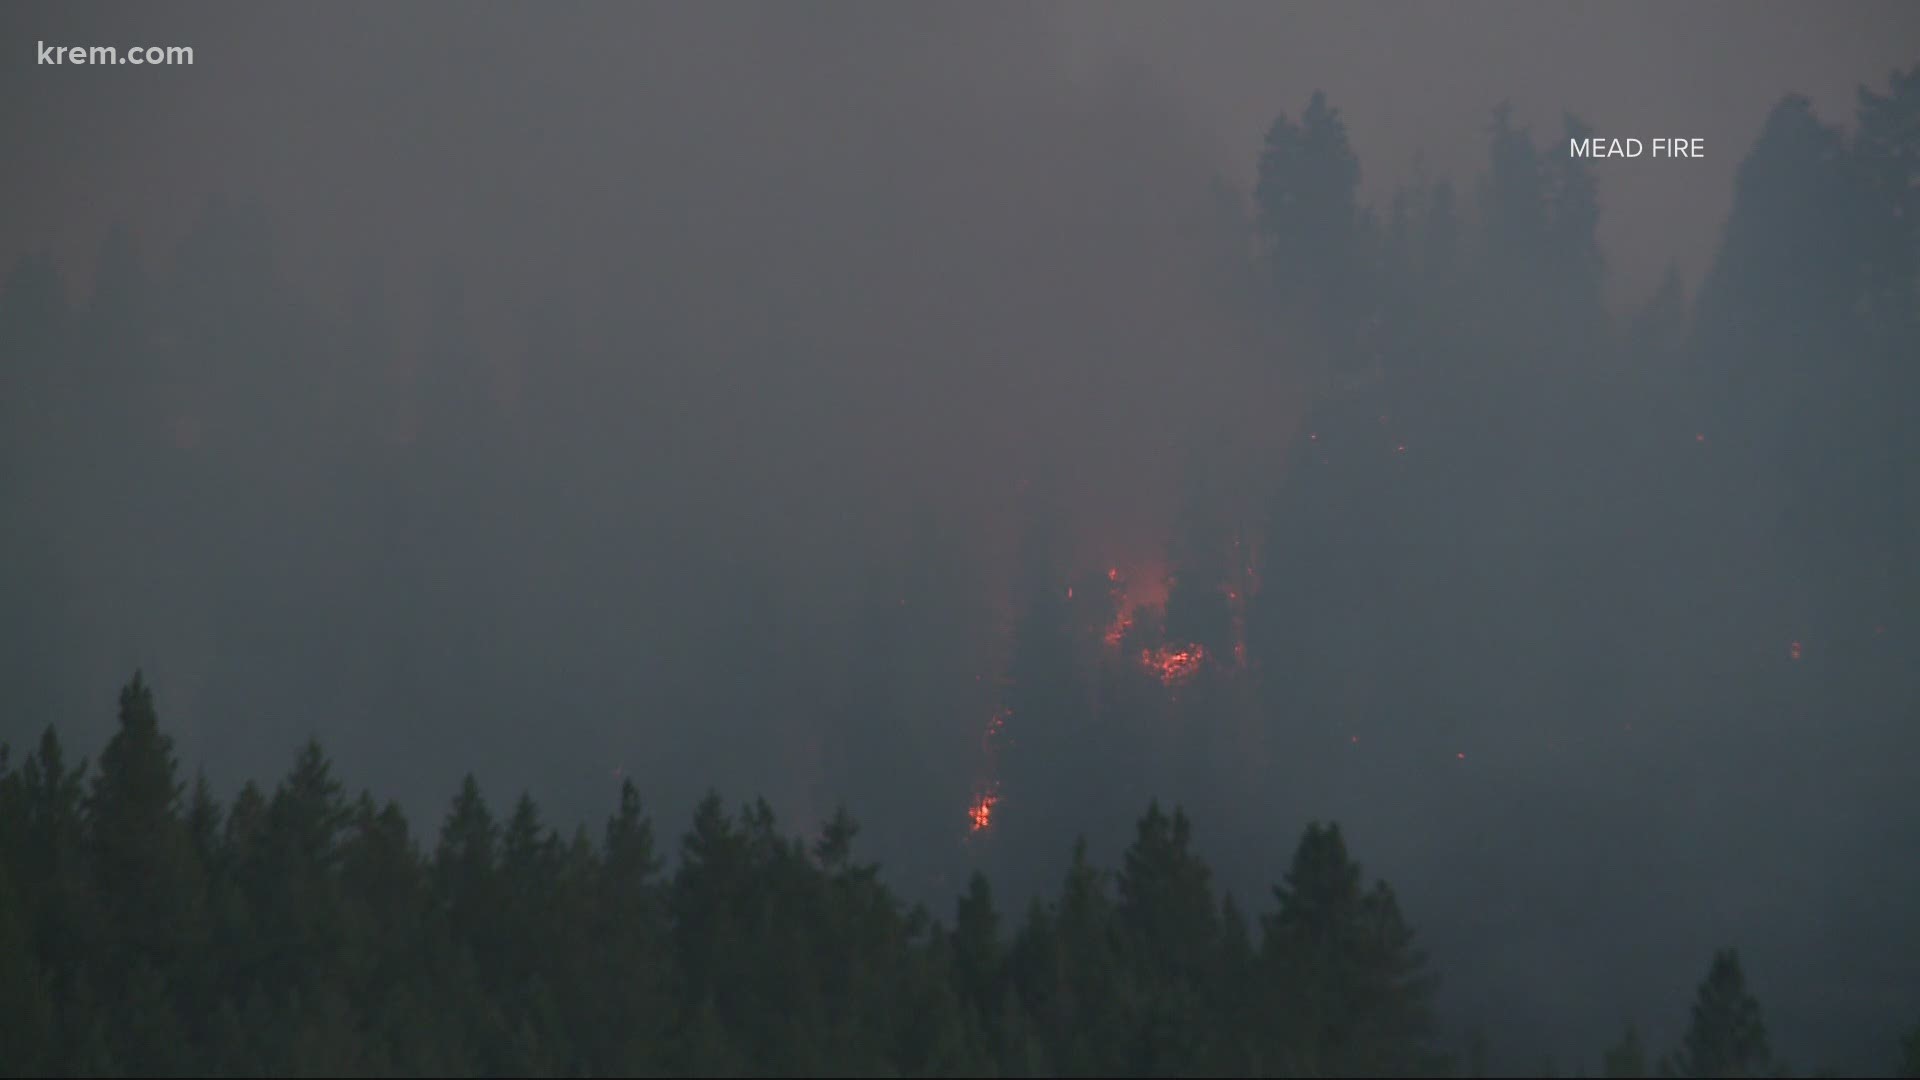 More than 240,000 acres have burned in Washington already this year.